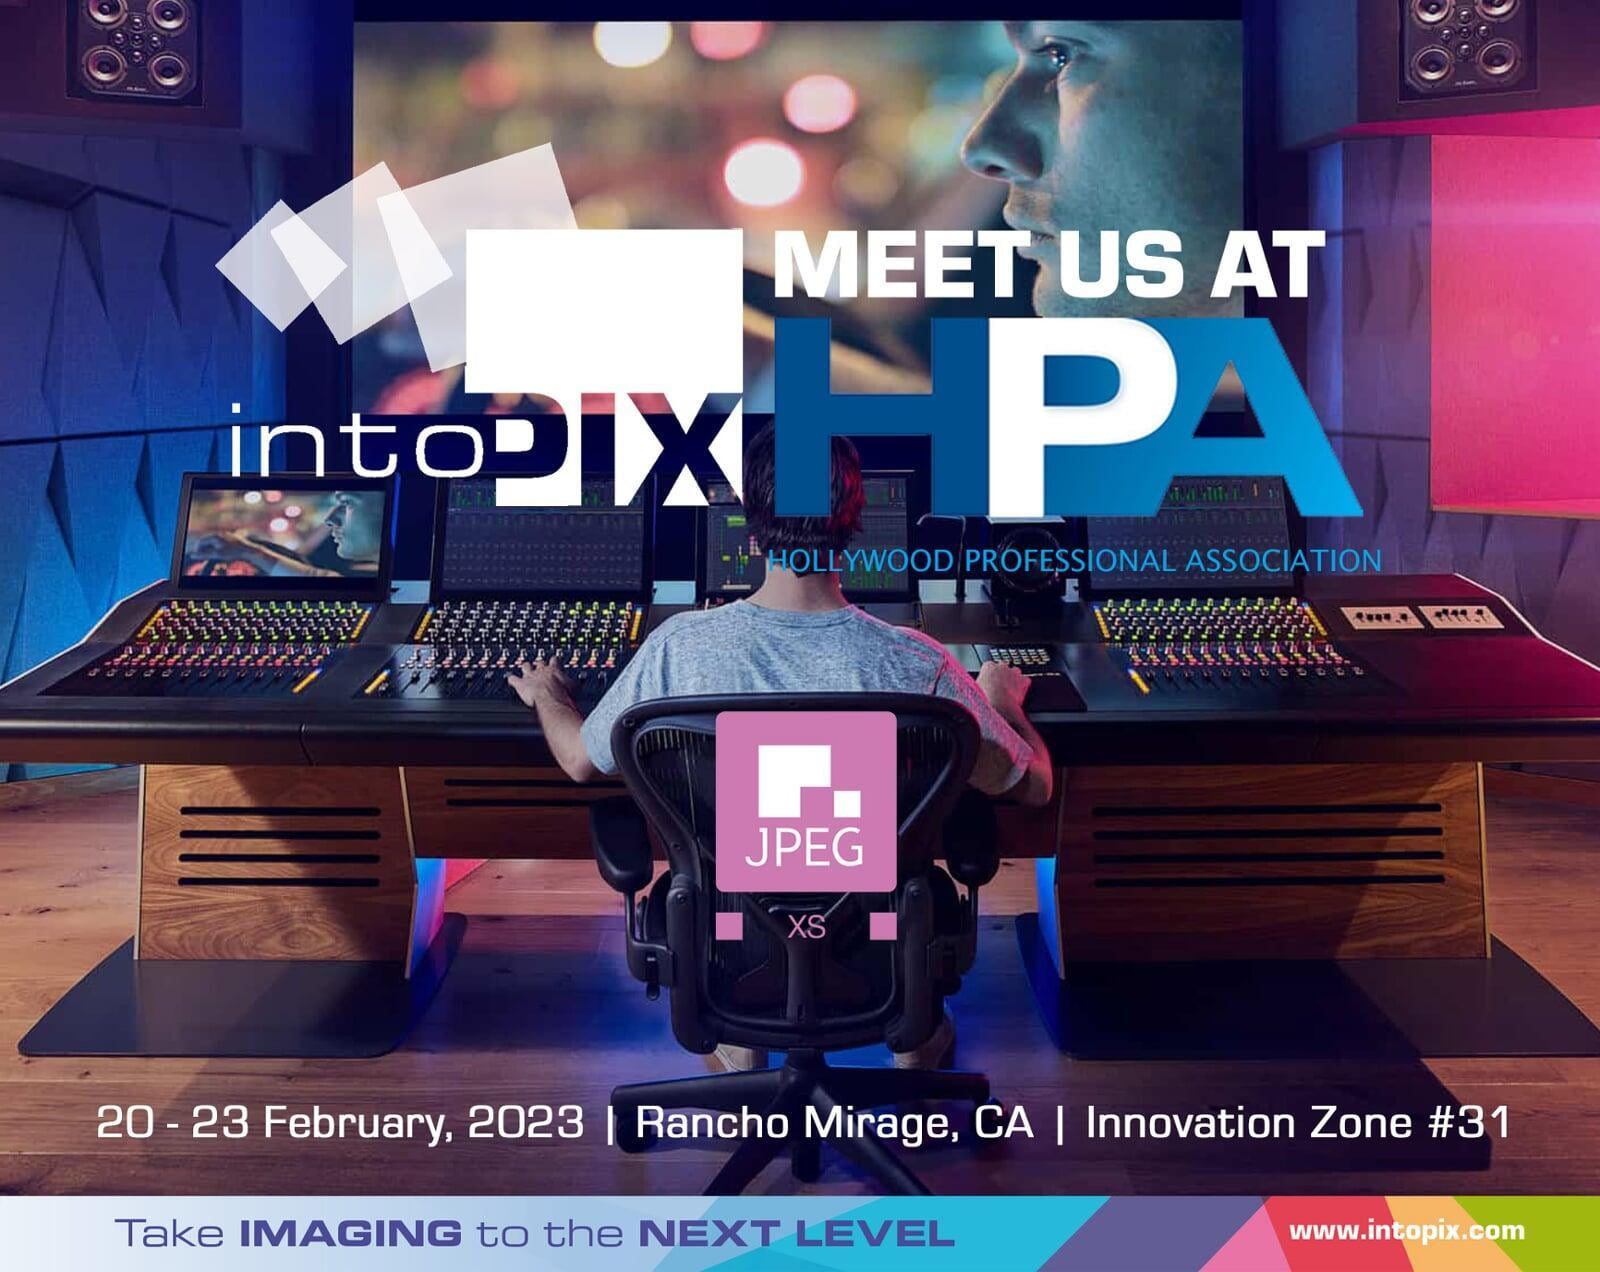 intoPIX showcases its new JPEG XS solutions to simplify IP video production workflow at HPA Tech Retreat 2023